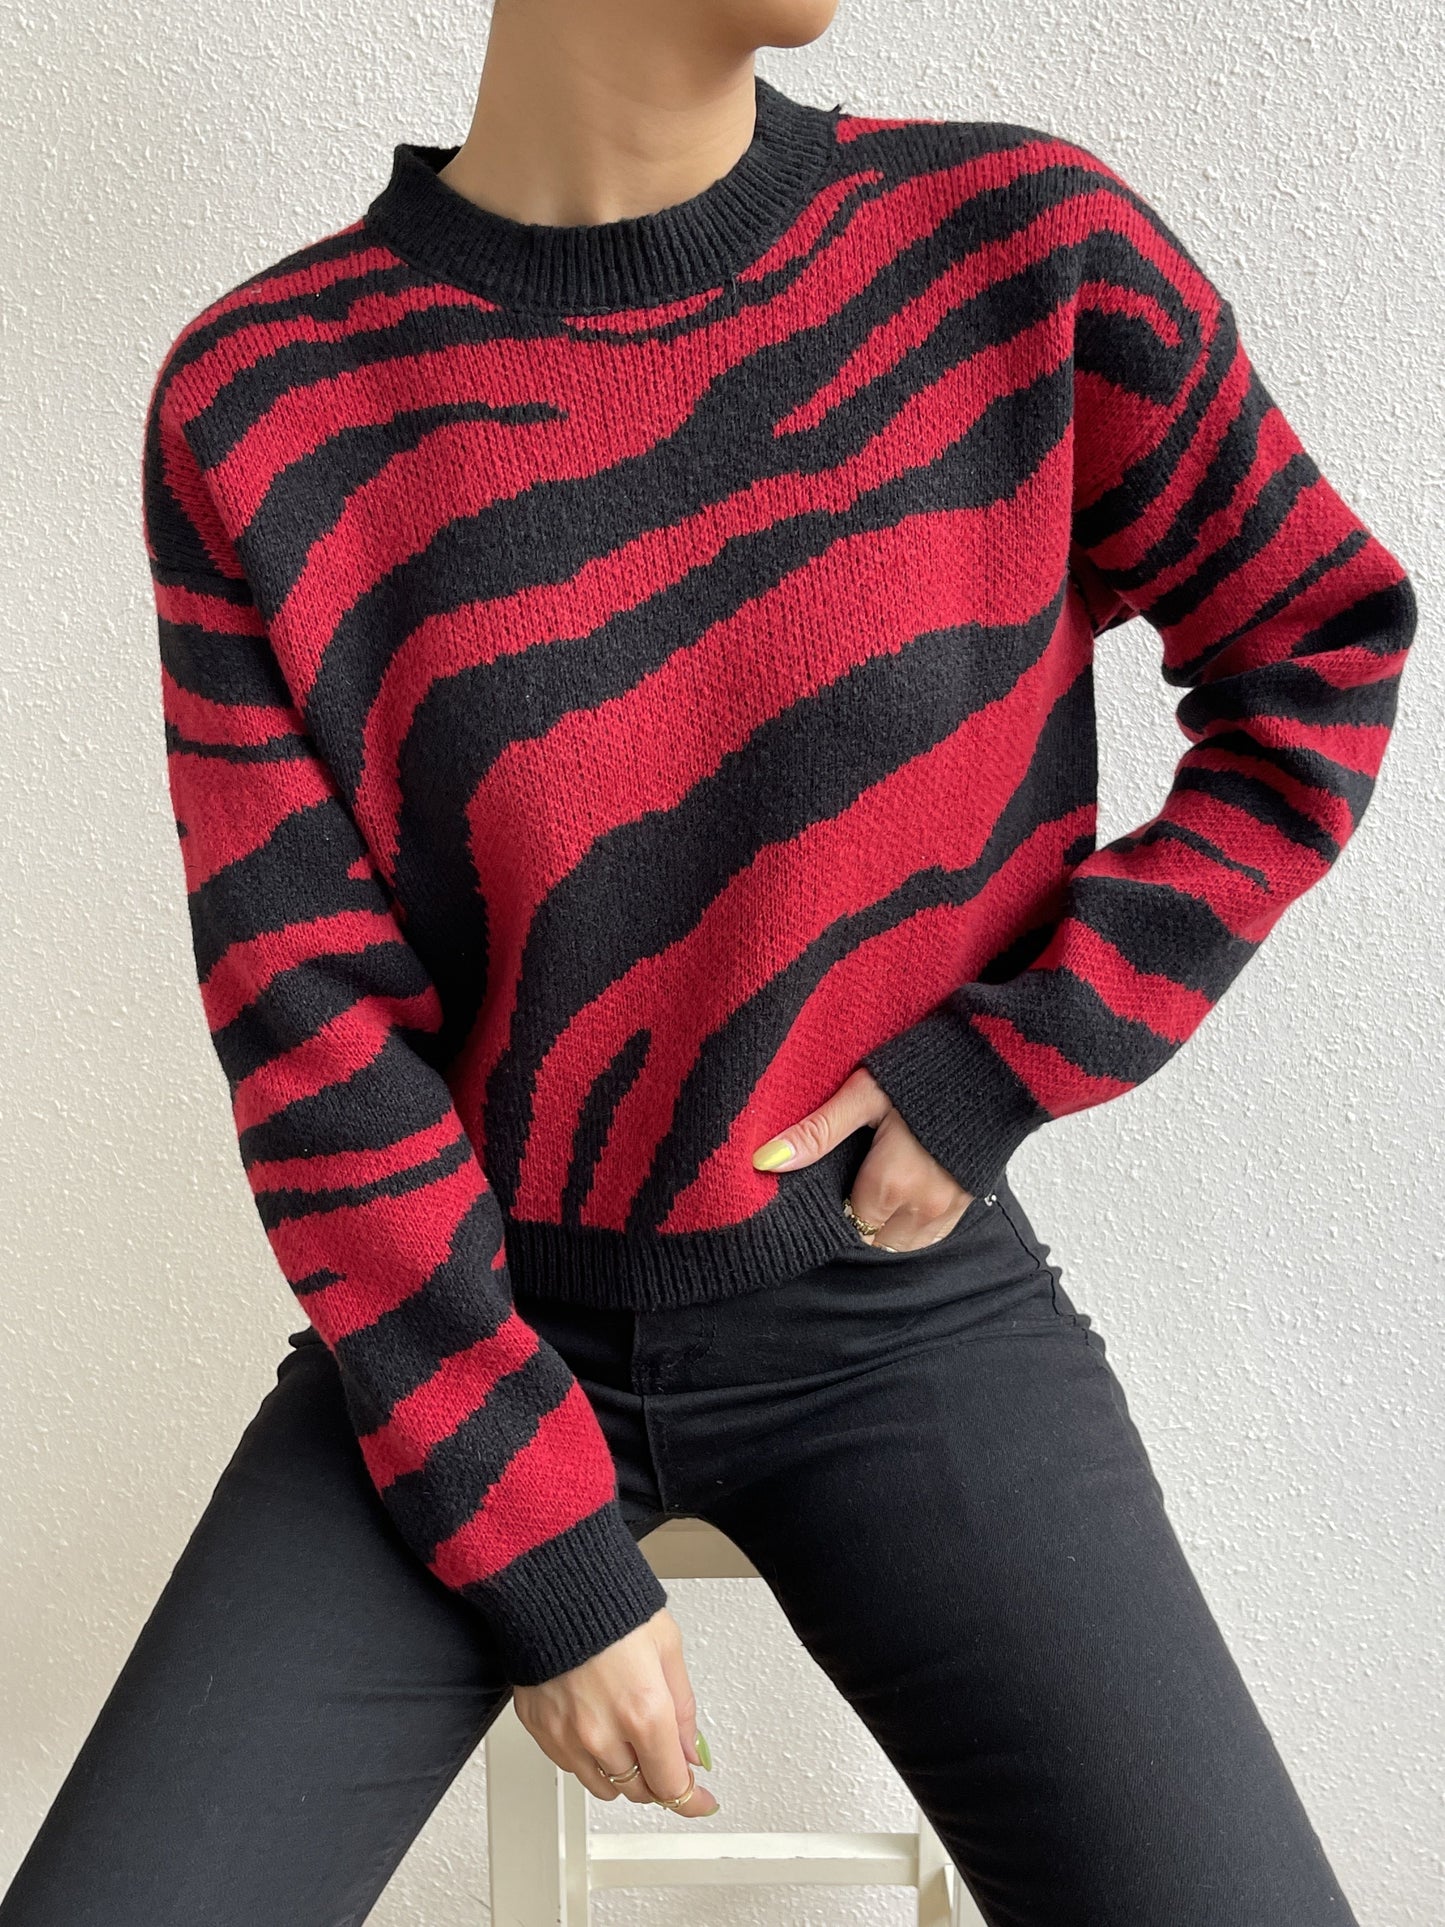 Antmvs Color Block Round Neck Long Sleeve Sweater, Vintage Jacquard Striped Comfy Autumn Sweater, Women's Clothing